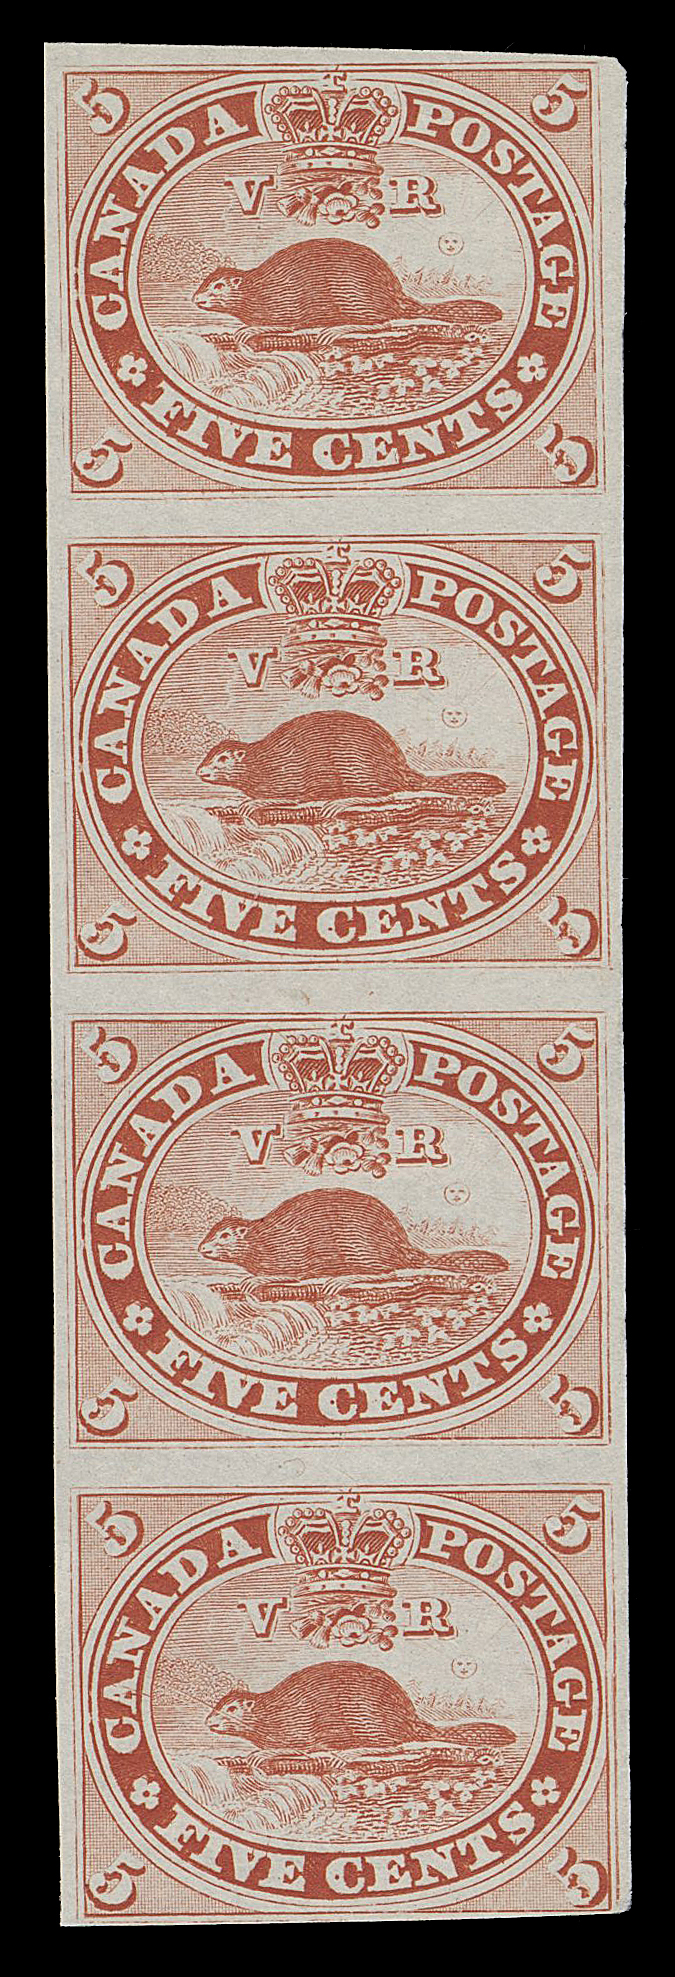 THREE PENCE AND FIVE CENTS  15TC + variety,Trial colour plate proof strip of four in orange vermilion on india, ample margins except slightly in outer frameline, shows the "Split Beaver" variety on lower proof (Position 90) that only appeared on State 4 of the plate, printed in 1863. Very rarely seen on a proof as it was very short-lived and not present on the bulk of plate proofs in vermilion printed in 1867 (State 10). A great item for the specialist, Fine

Provenance: The "Lindemann" Collection (private treaty, circa. 1997)